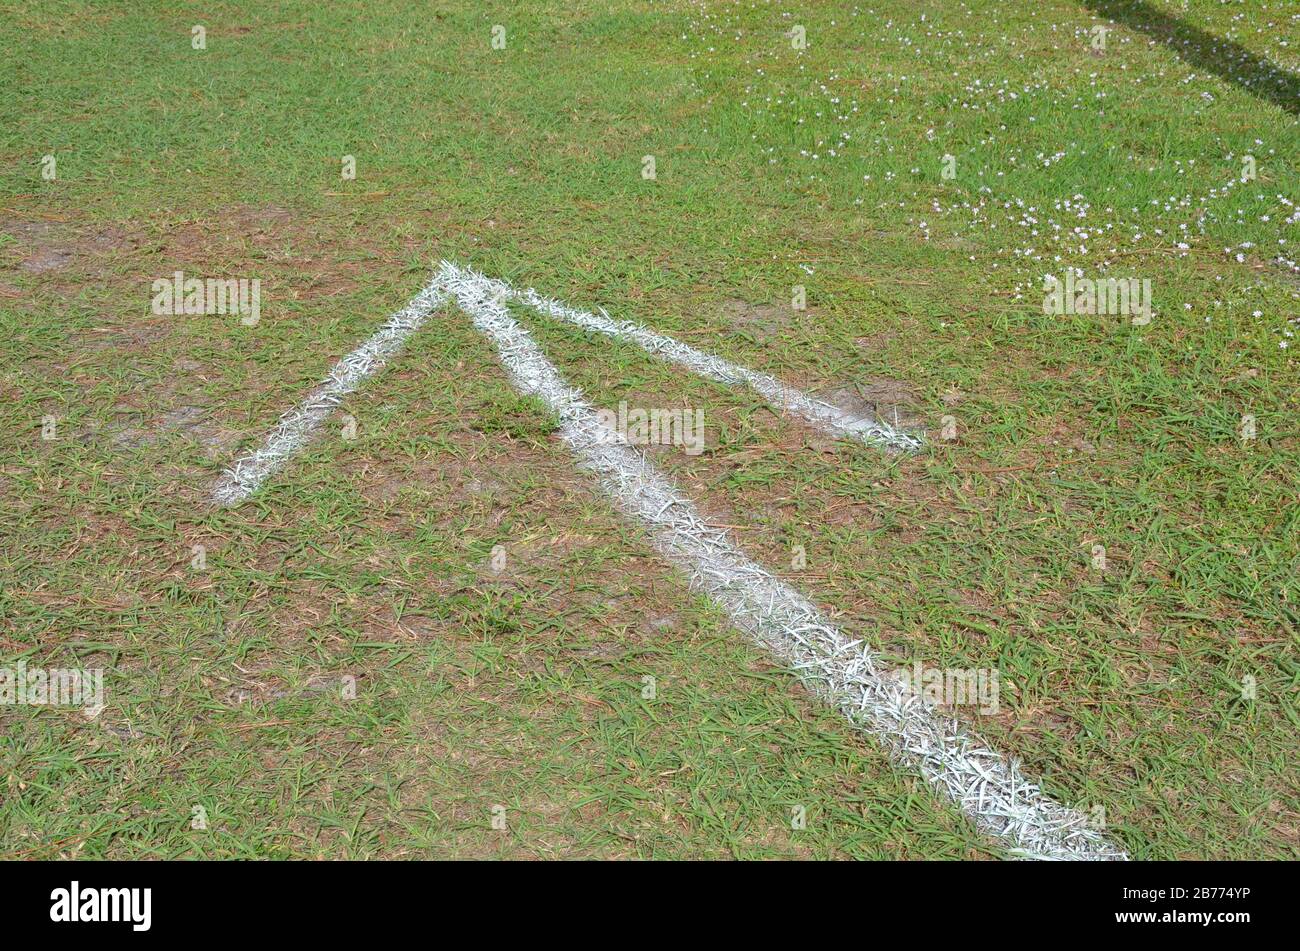 green grass or lawn with painted white arrow or pointer Stock Photo